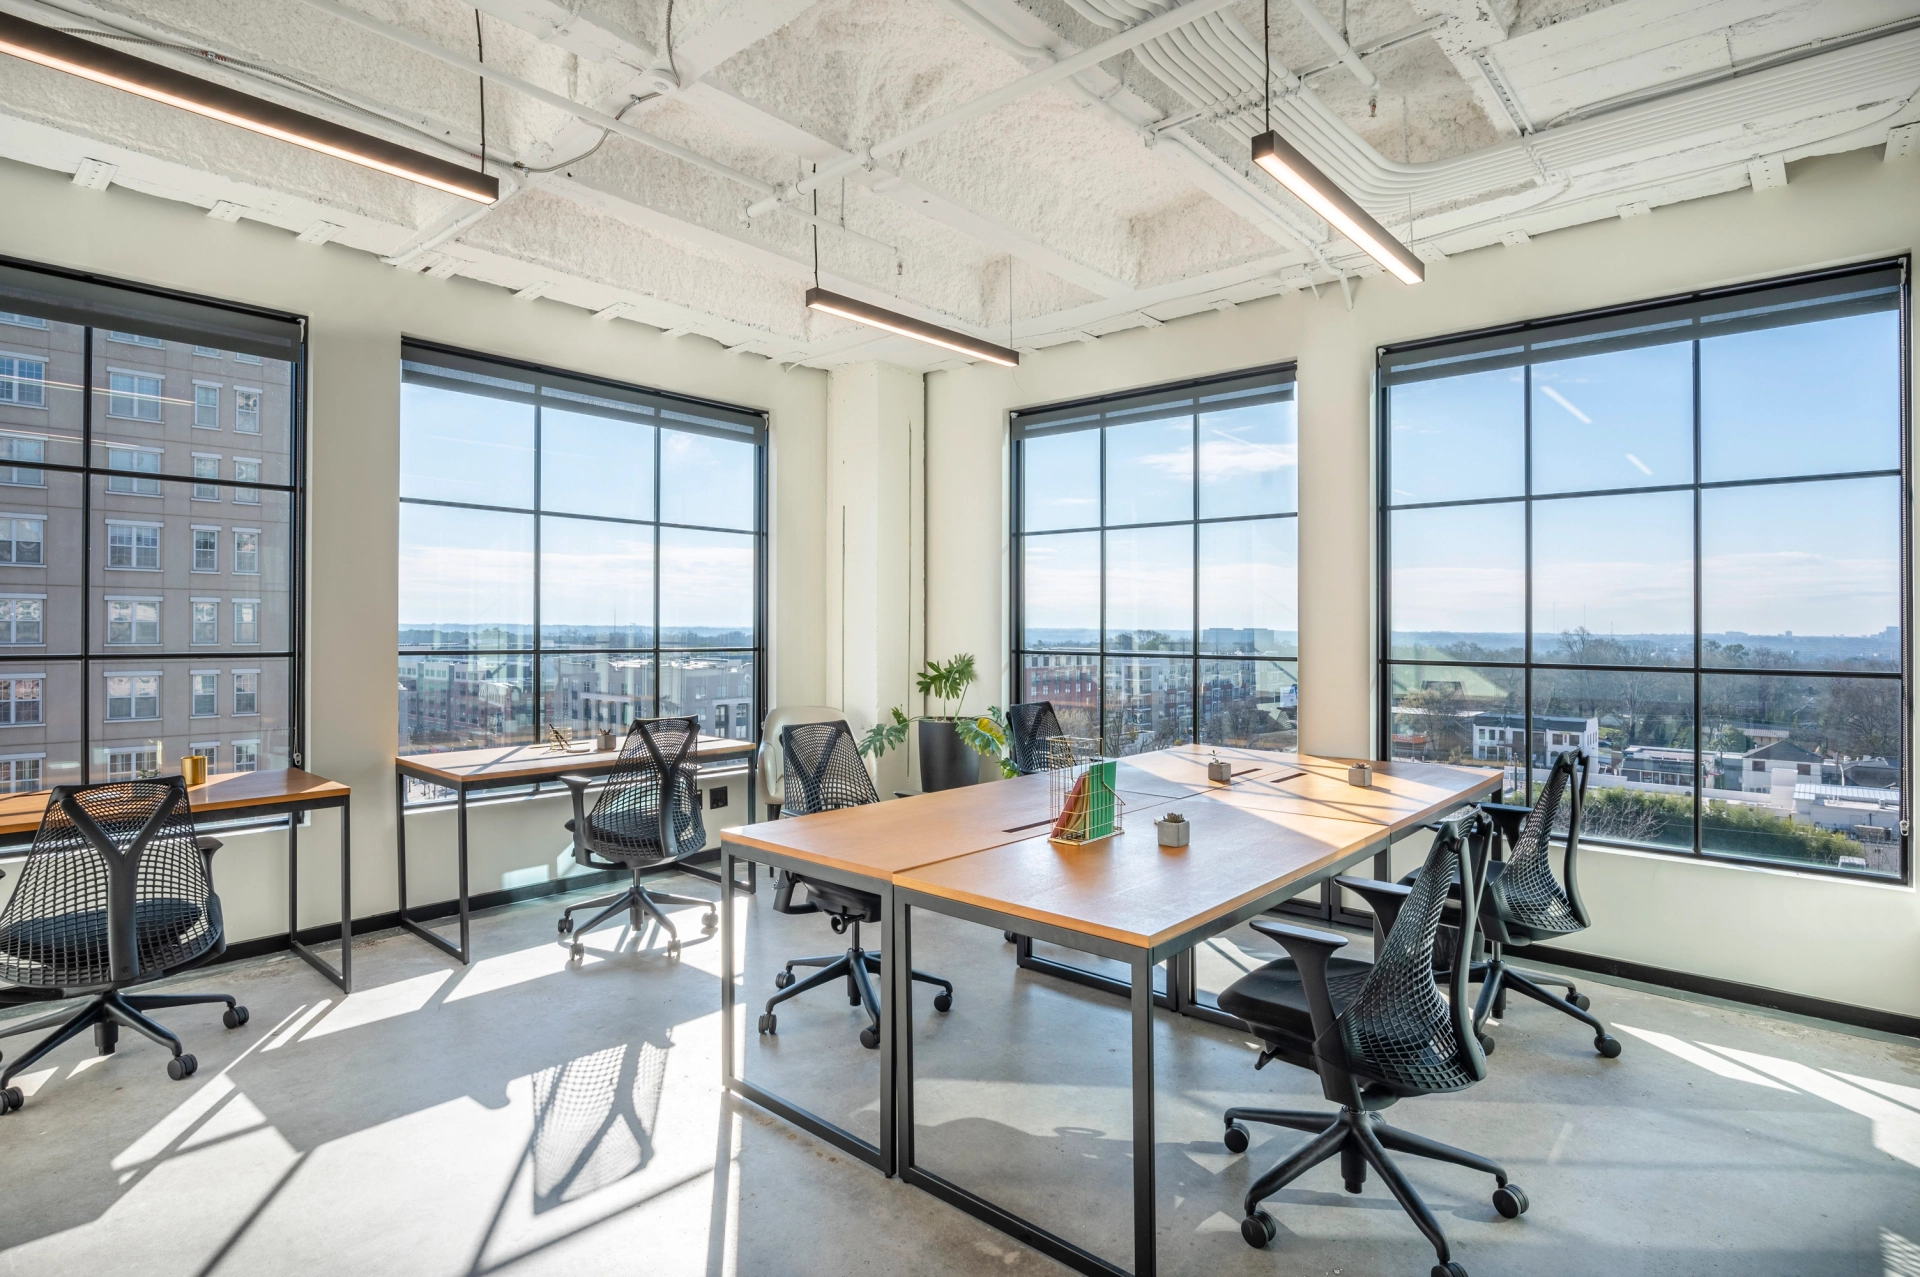 A coworking office with large windows overlooking a city.